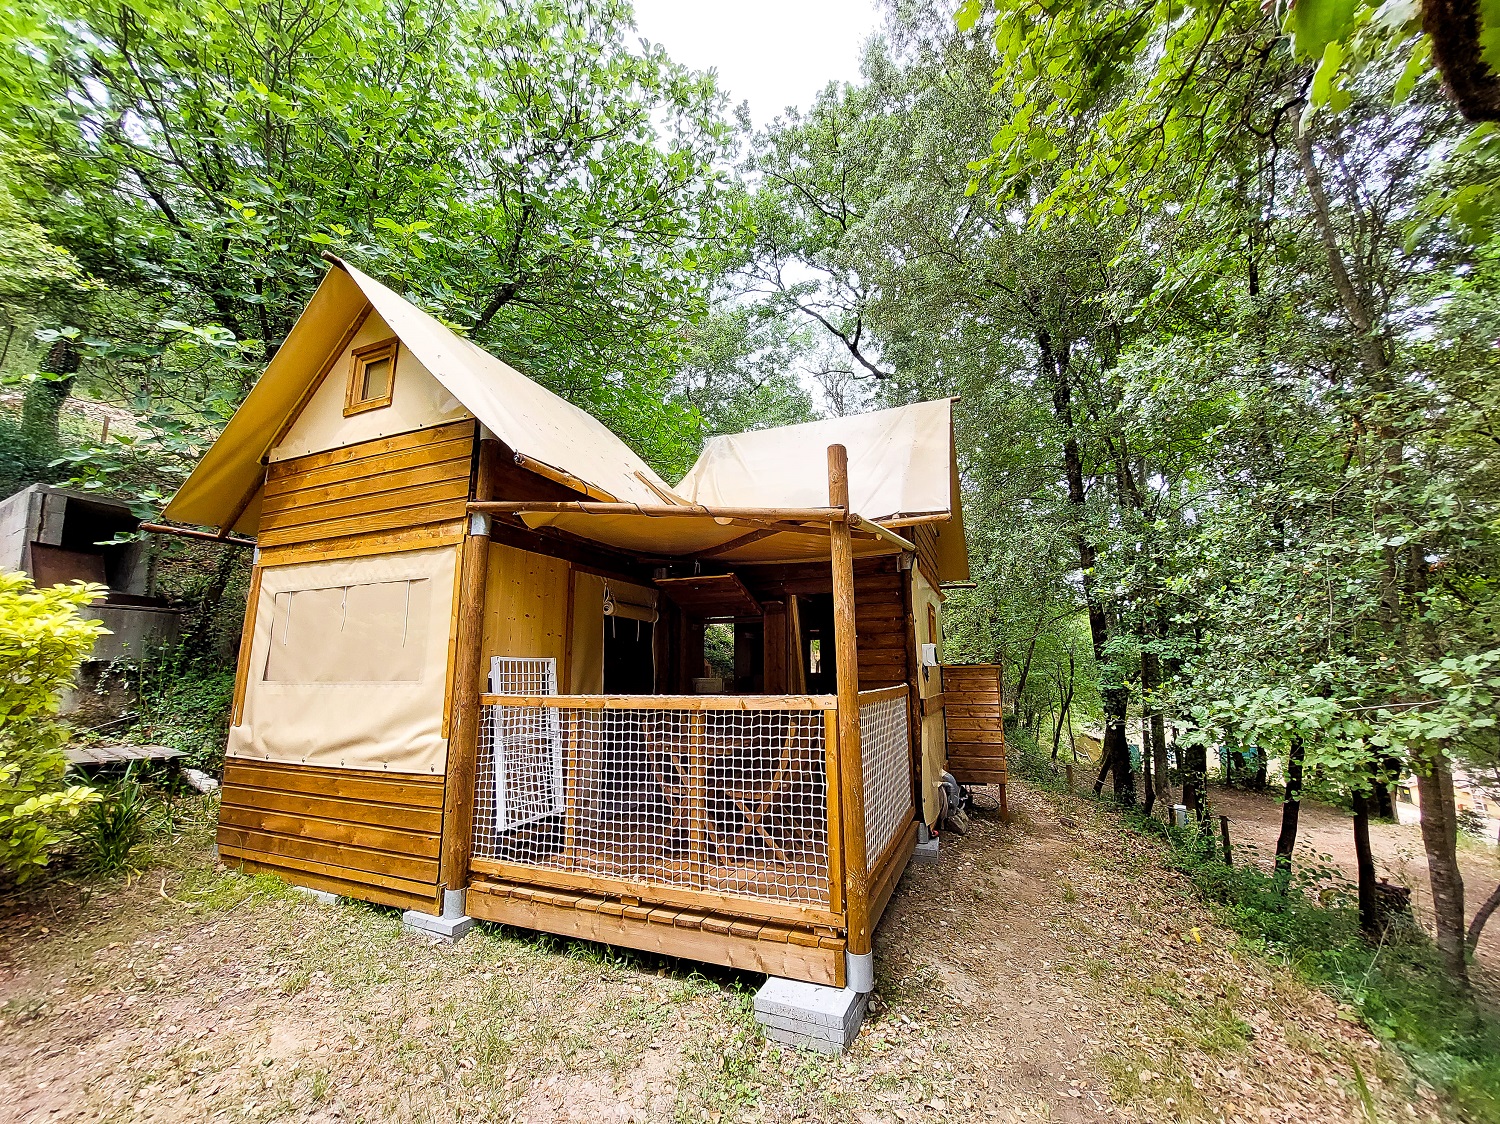 Accommodation - Cabatente Kitchen And Bathroom - Camping Bords de Ceze